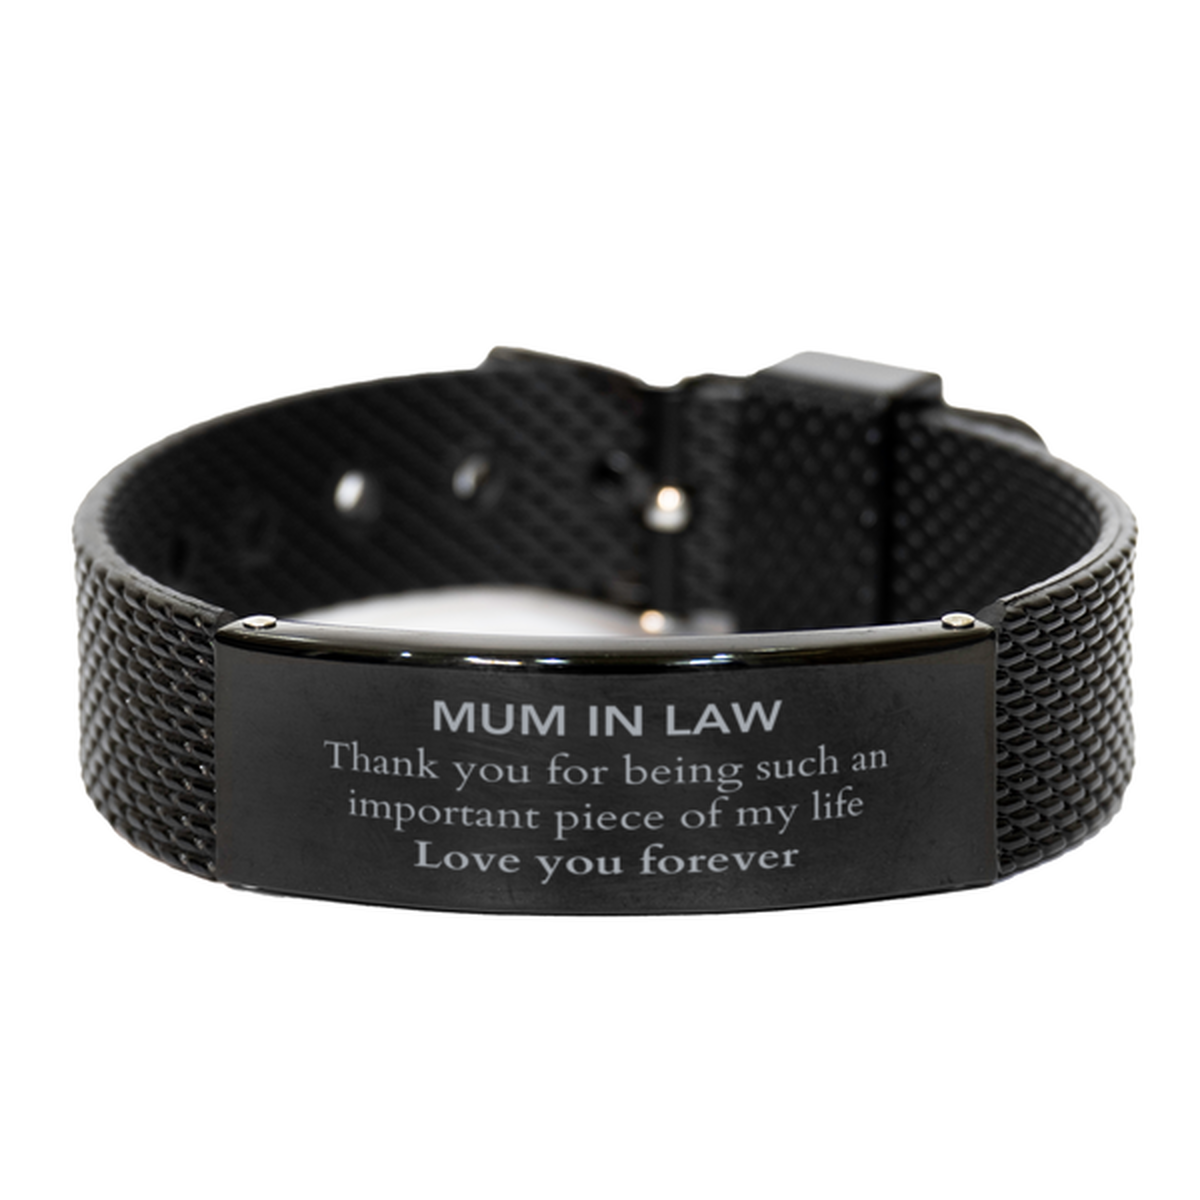 Appropriate Mum In Law  Black Shark Mesh Bracelet Epic Birthday Gifts for Mum In Law  Thank you for being such an important piece of my life Mum In Law  Christmas Mothers Fathers Day